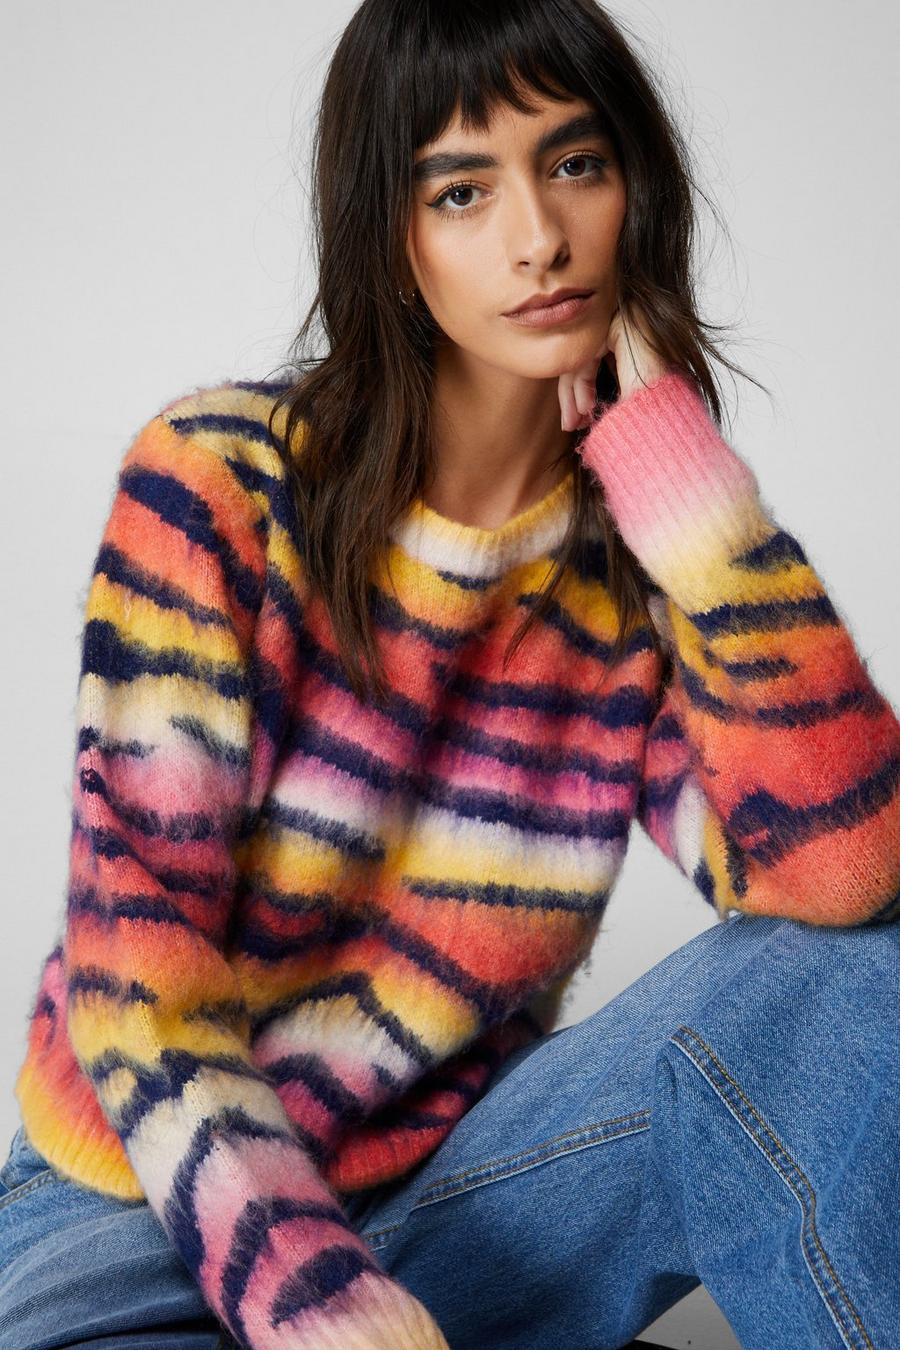 Tiger Stripe Knitted Sweater